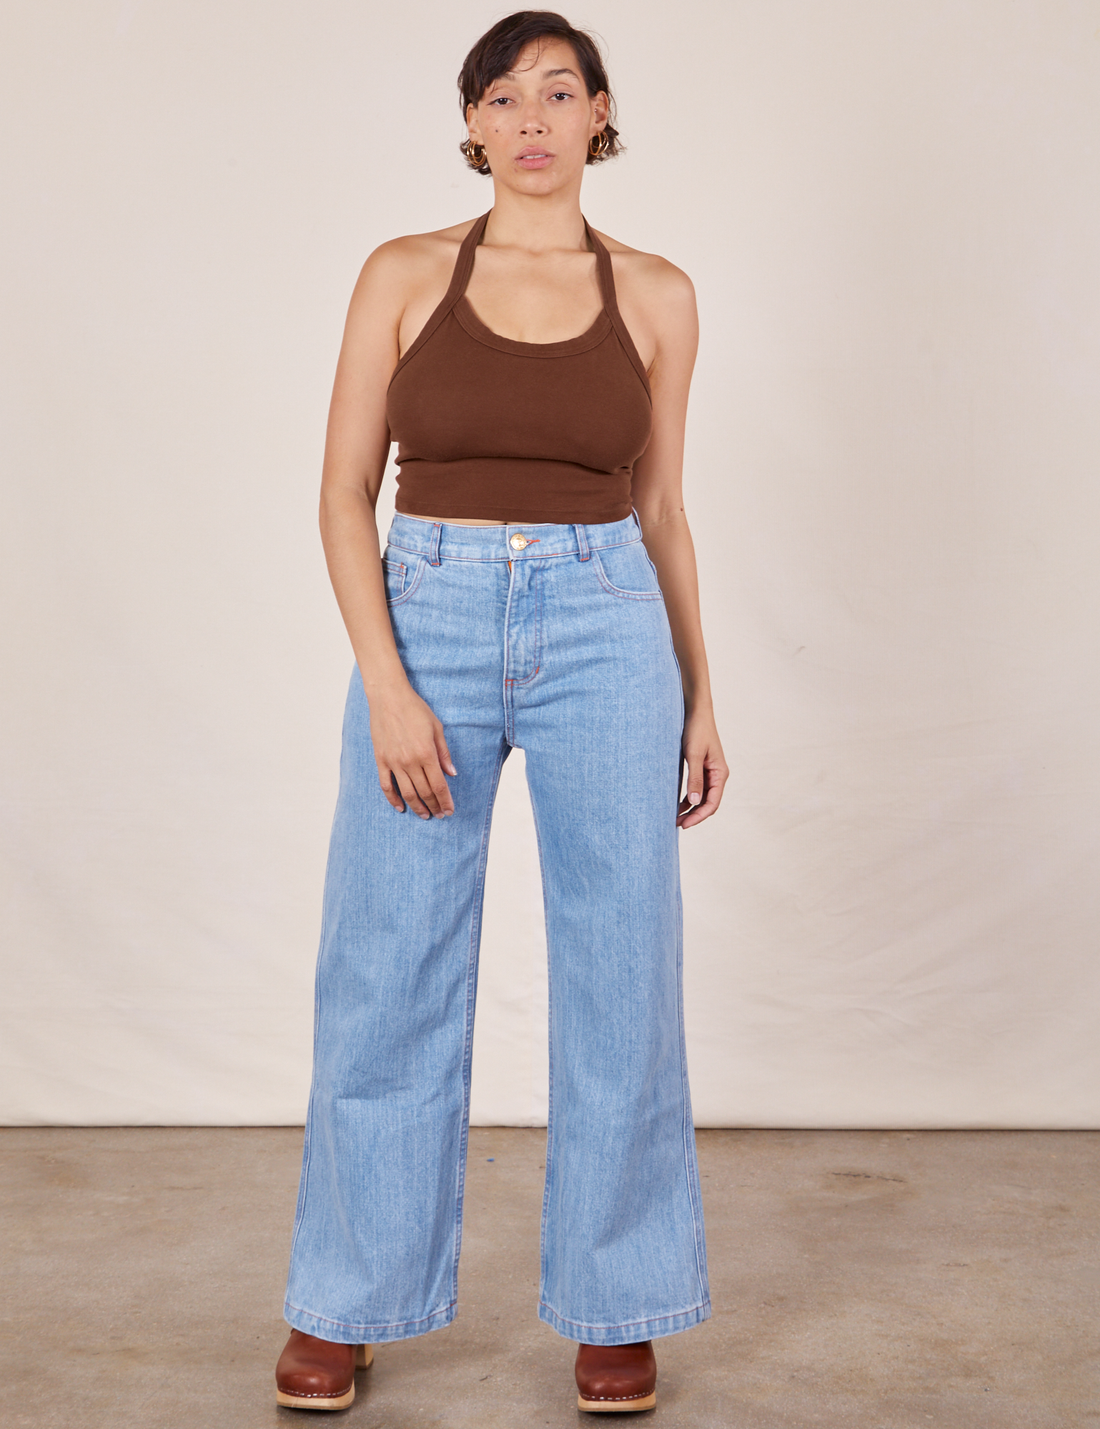 Tiara is 5'4" and wearing XS Halter Top in Fudgesicle Brown and light wash Sailor Jeans